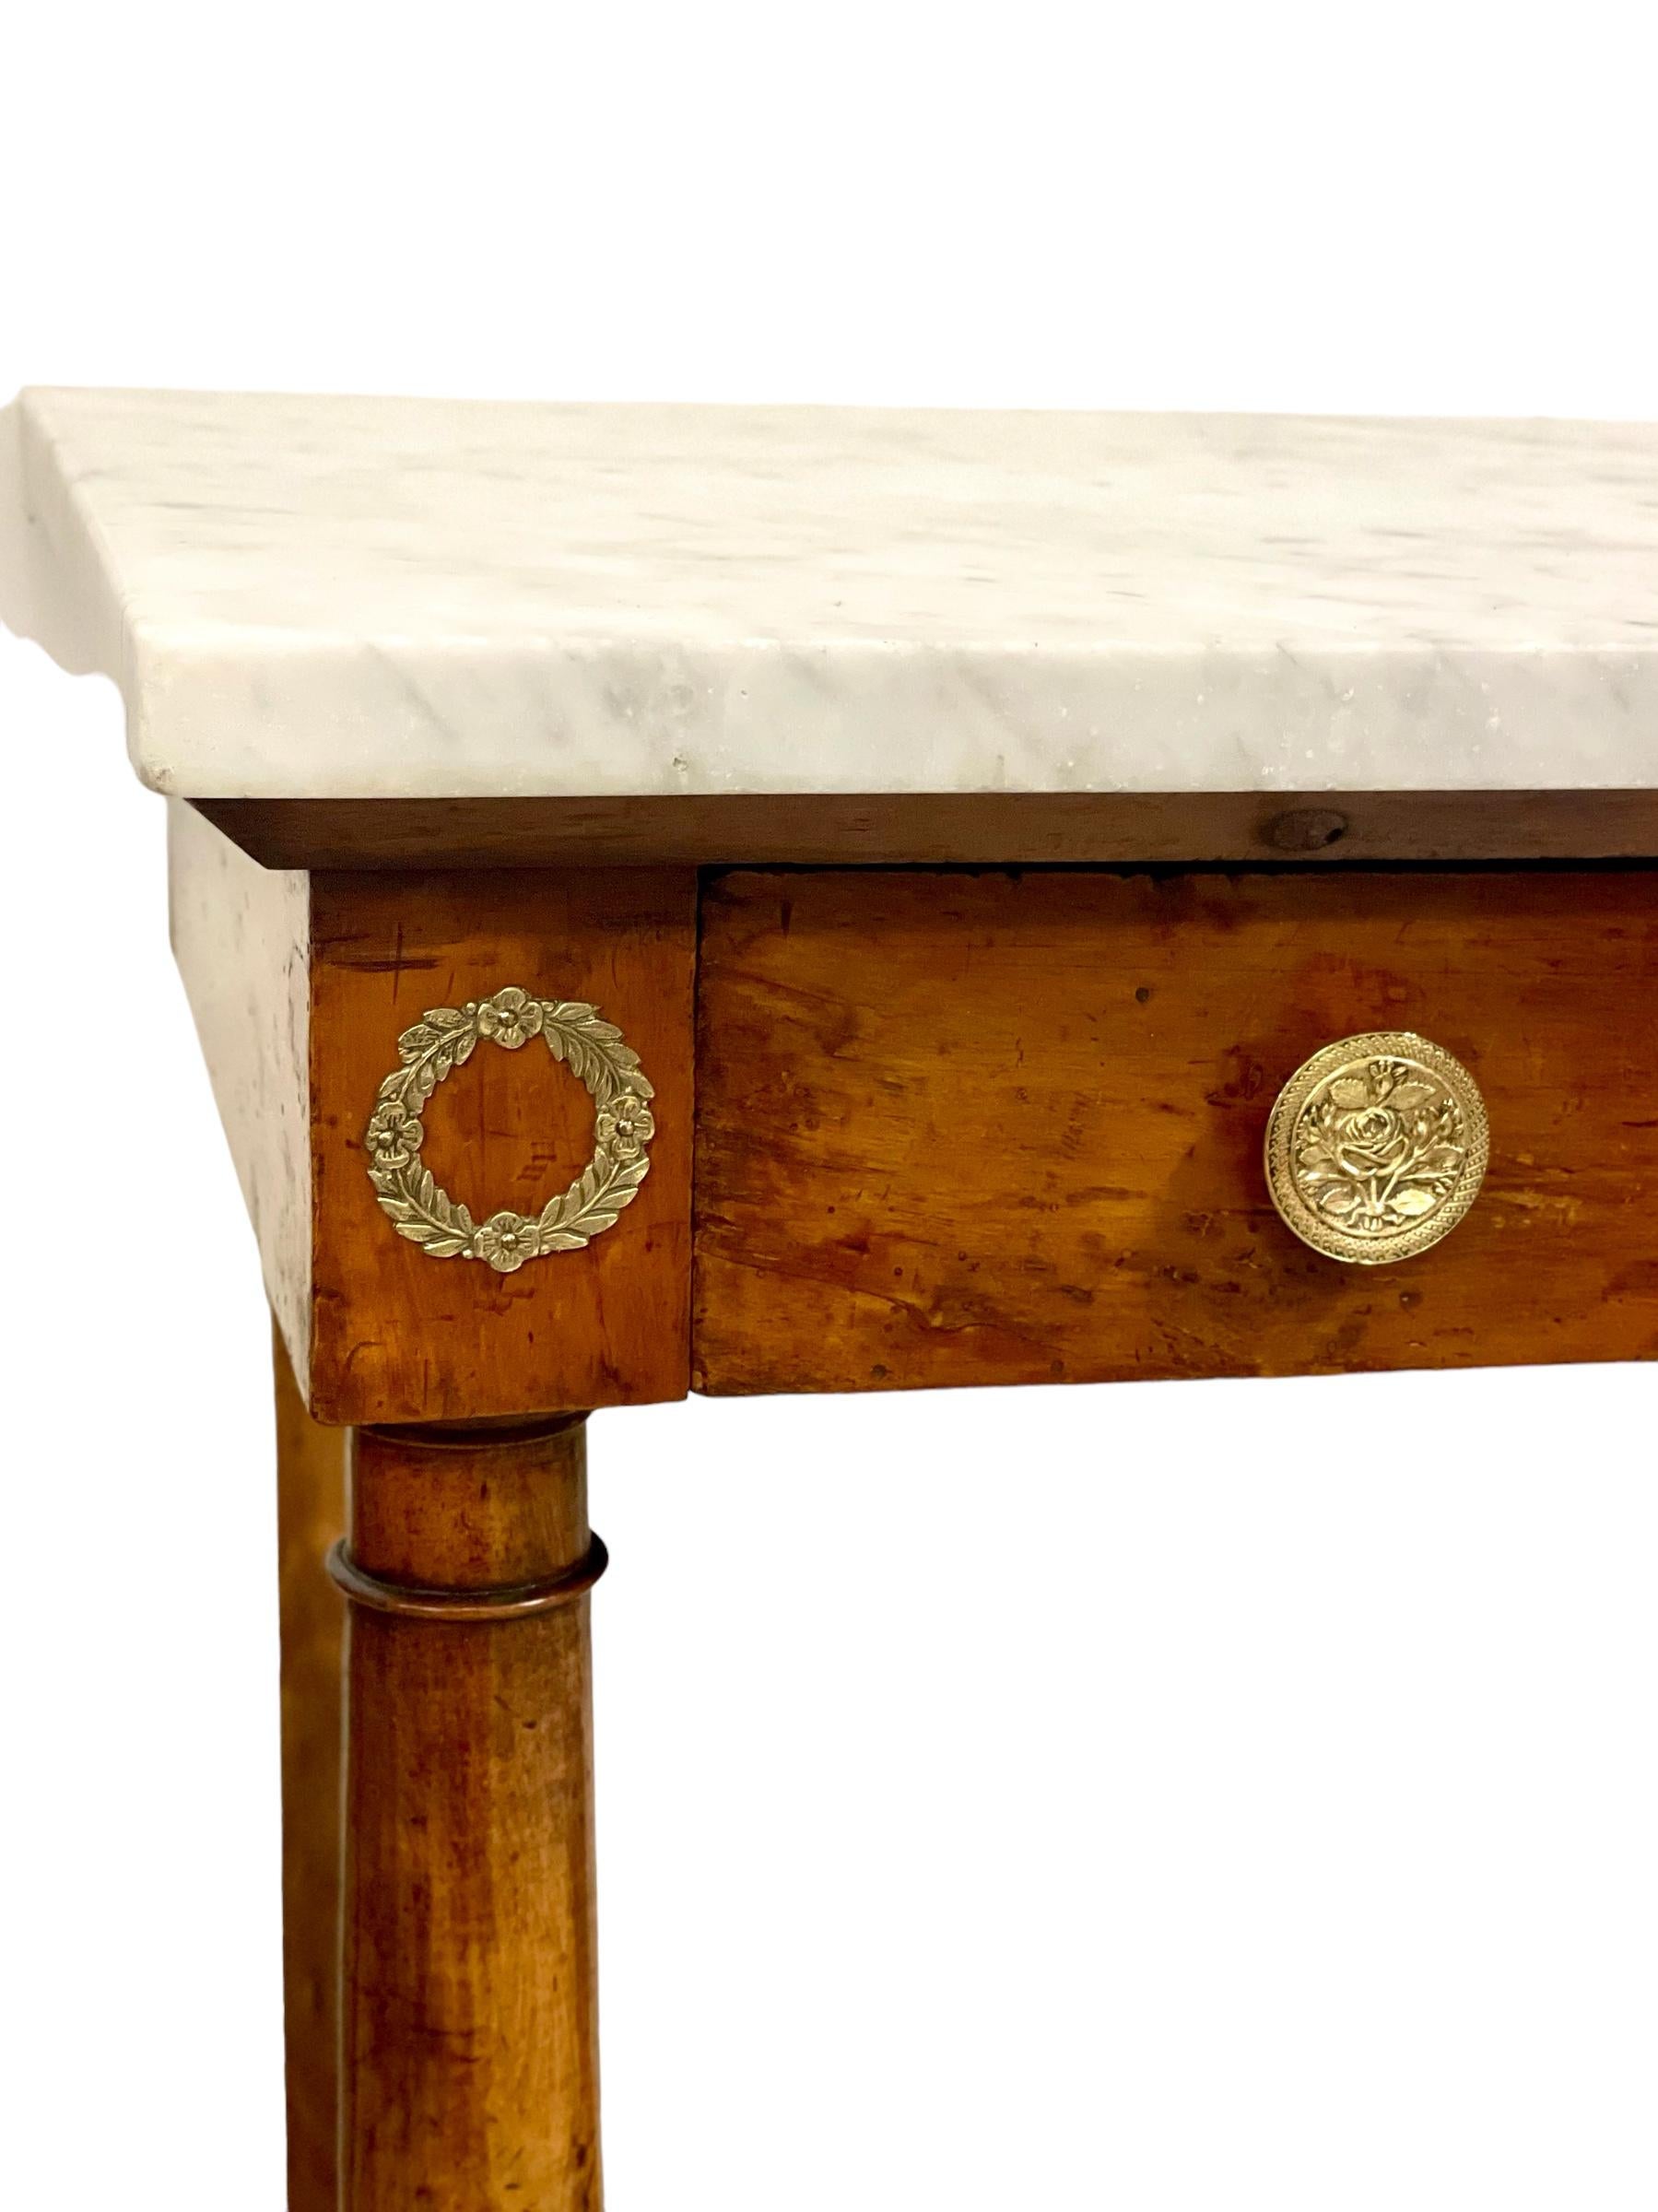 French Empire Period Console Table with Marble Top Dating from the Early 19th Century For Sale